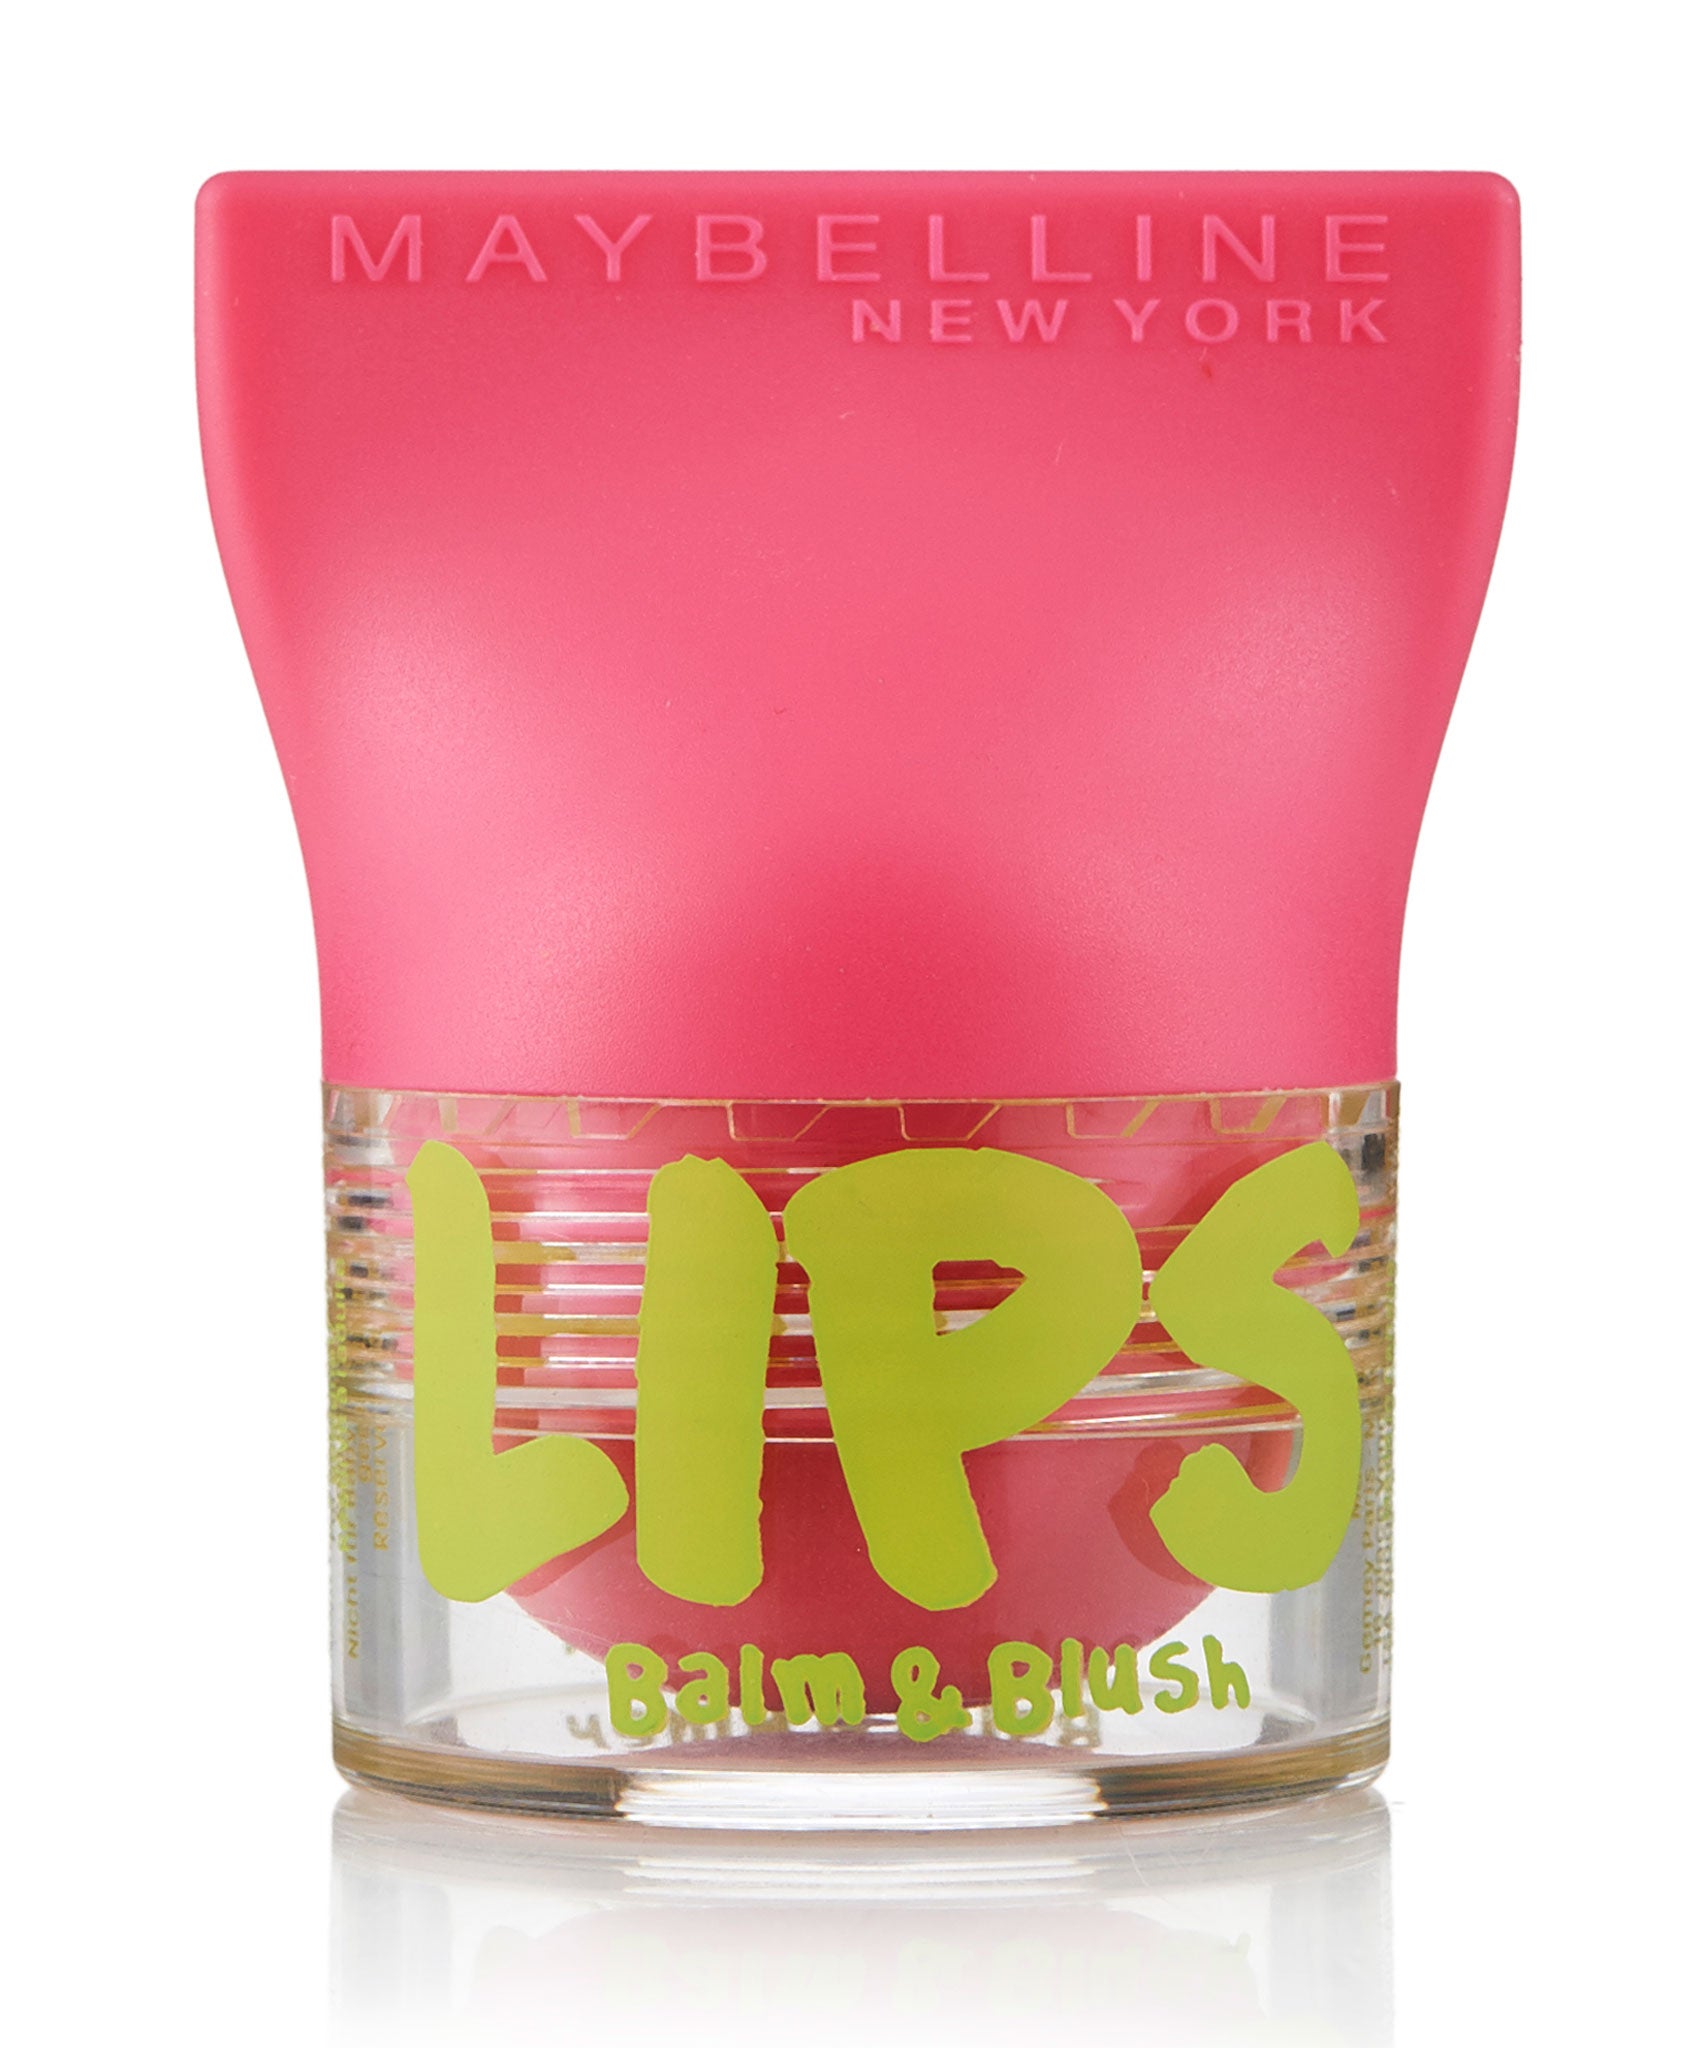 Baby lips balm & blush in 02 flirty pink, £4.99, Maybelline, boots.com